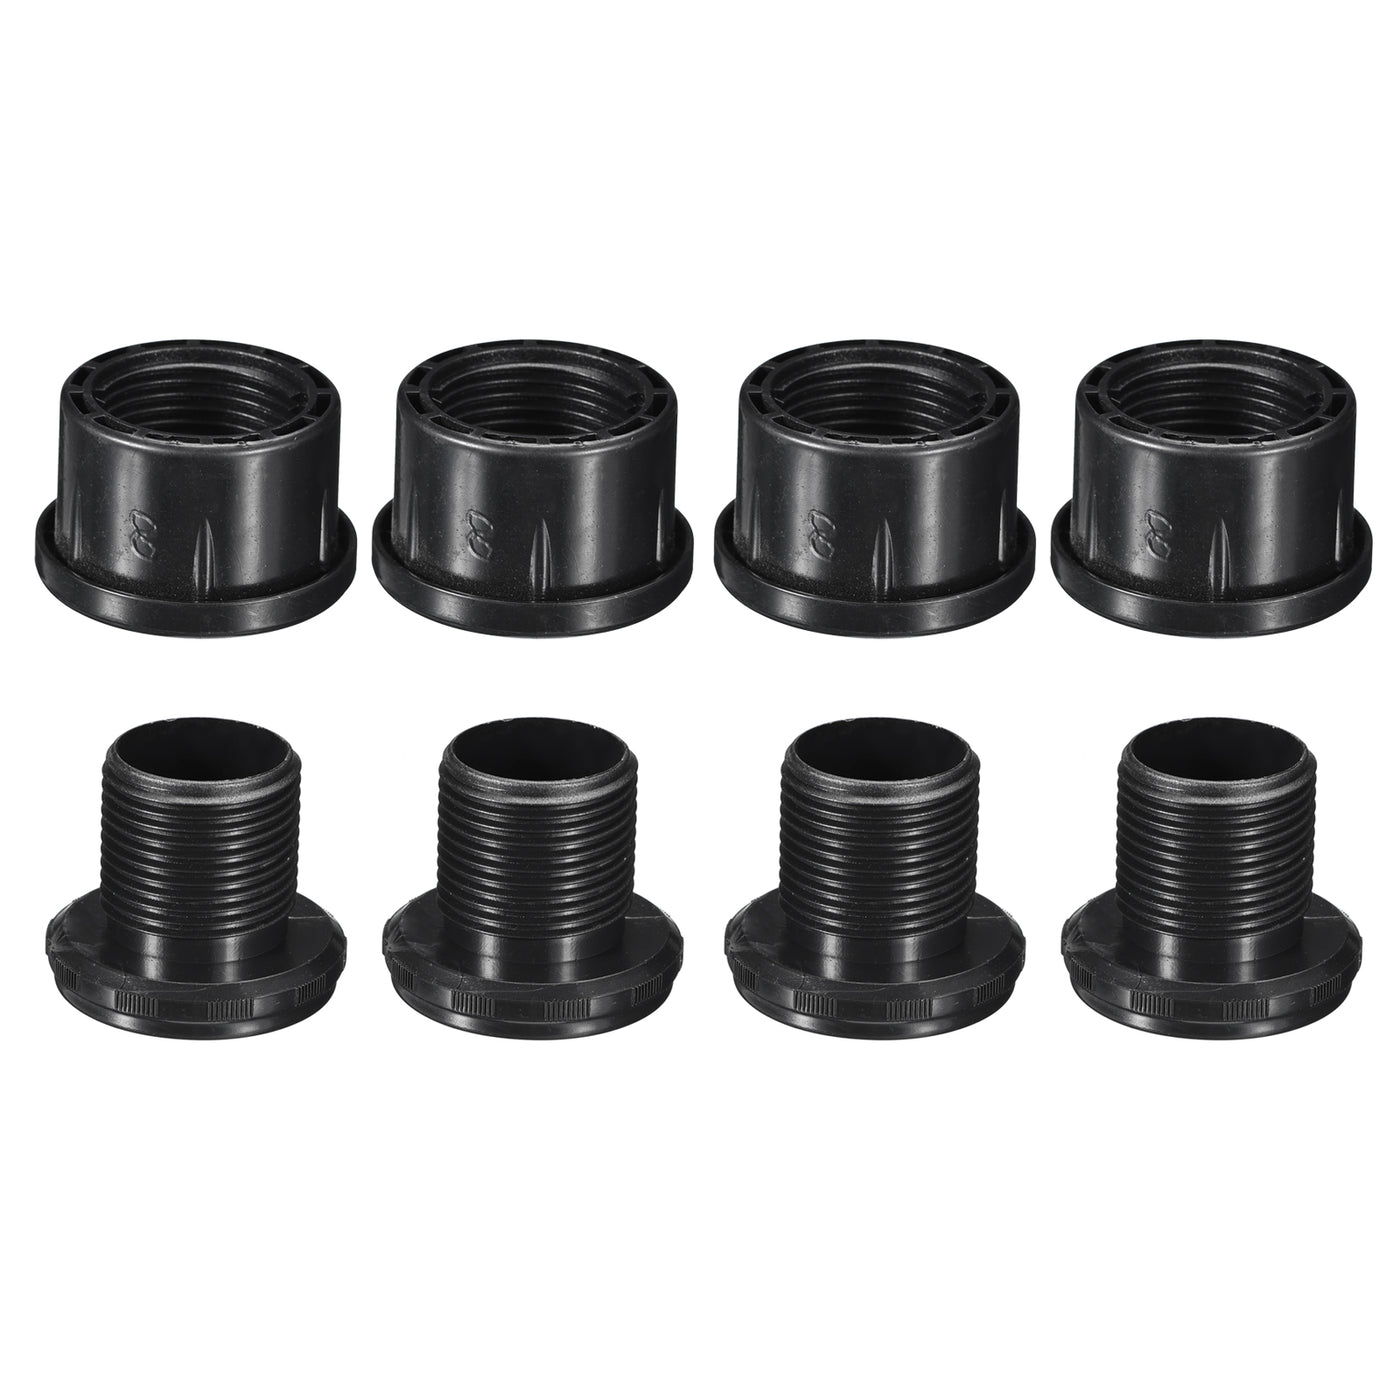 uxcell Uxcell 4Pcs Inserts for Round Tubes with Leveling Feet, for 50mm/1.97" Dia Round Tube